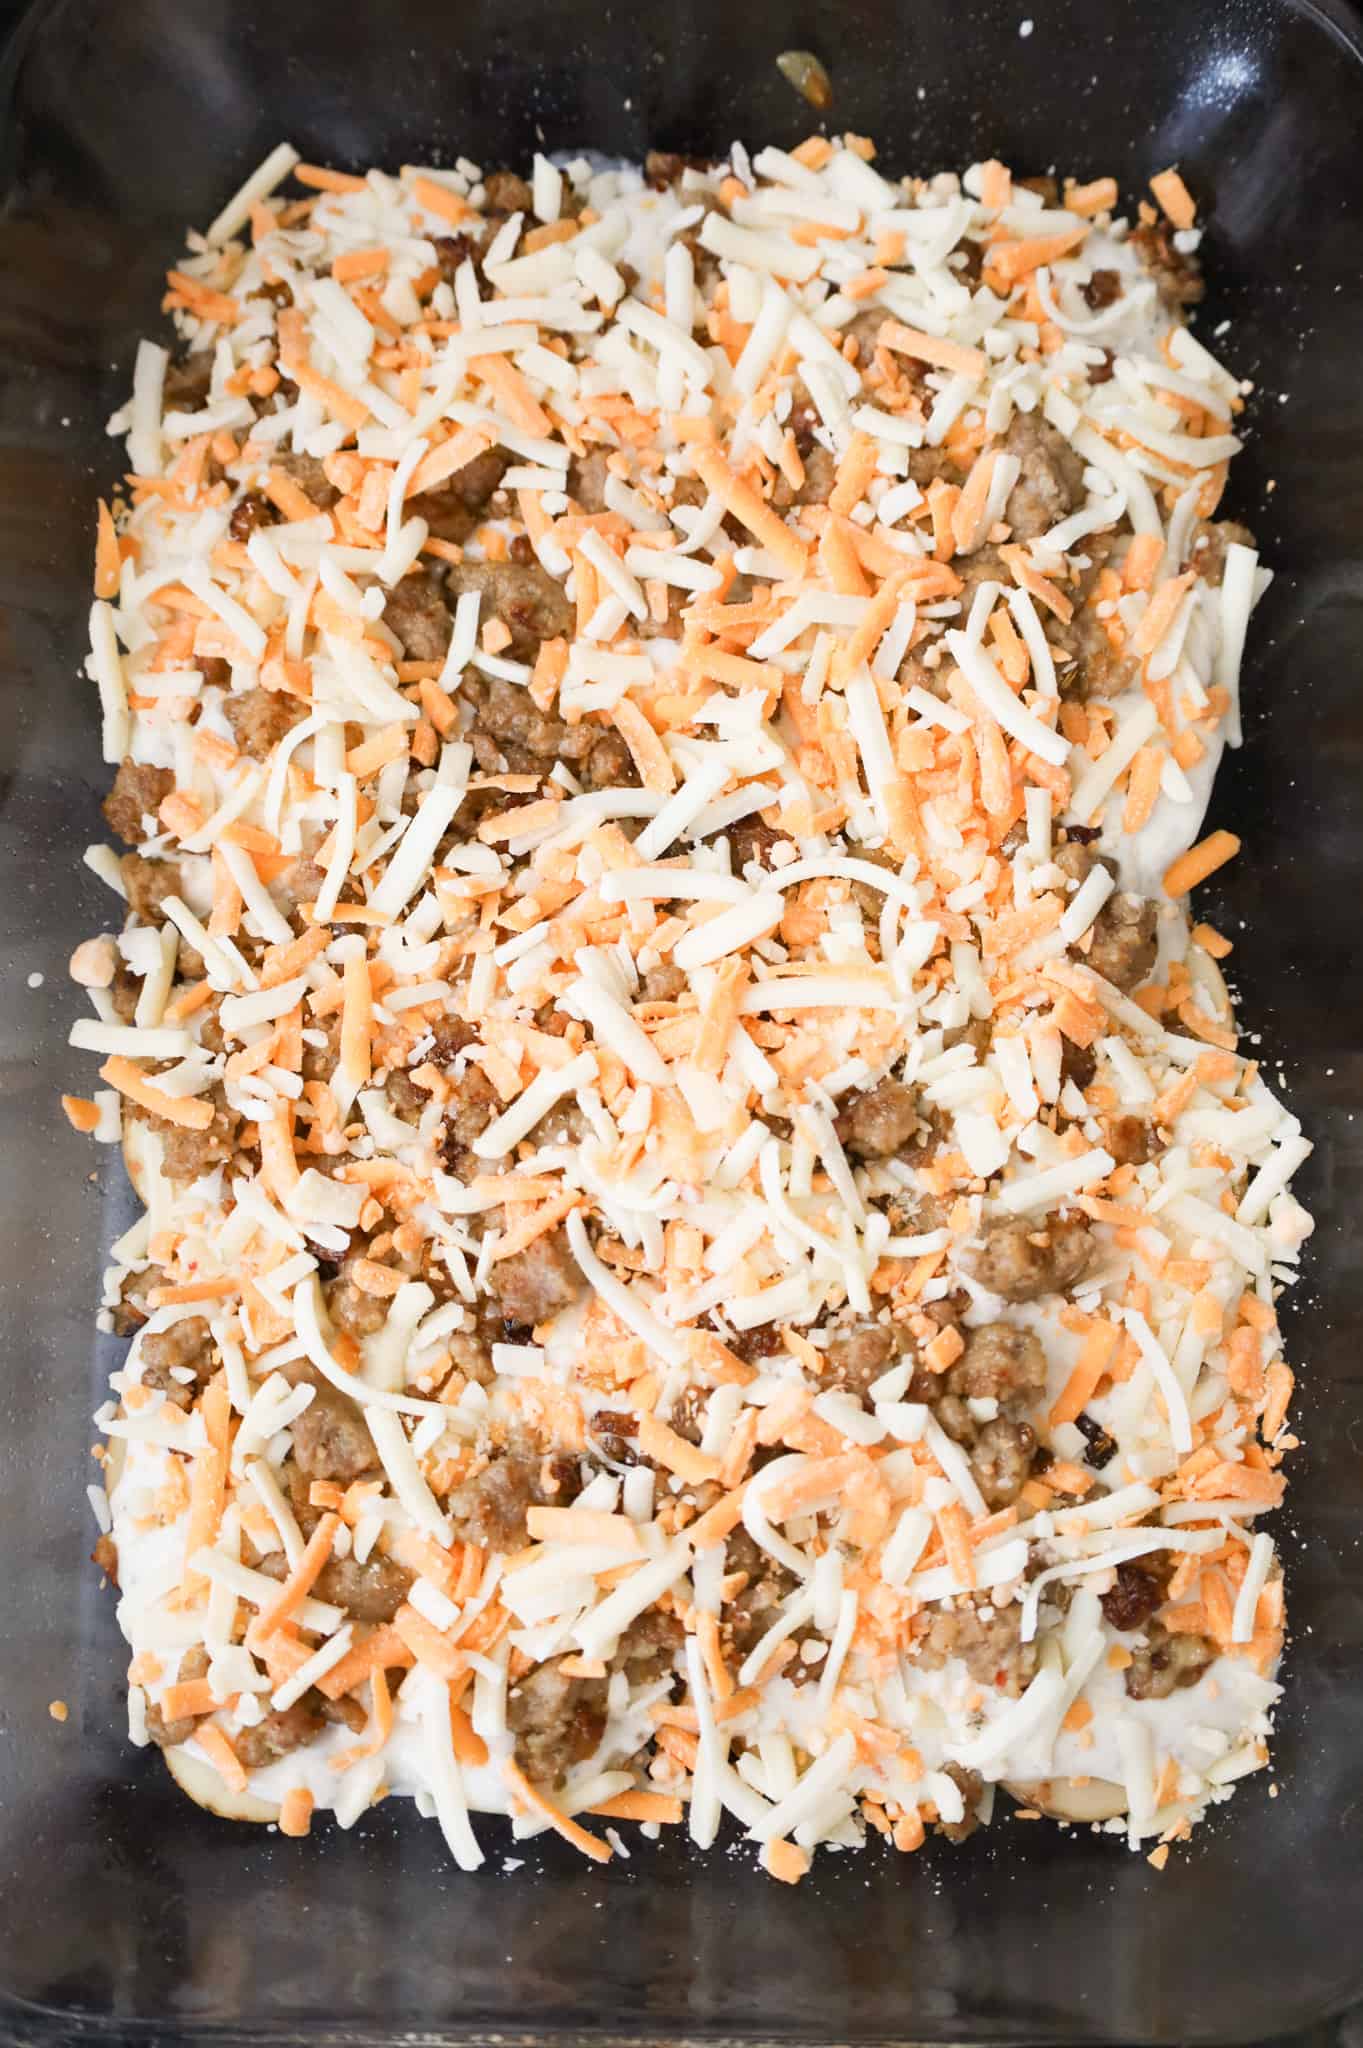 shredded cheddar and mozzarella cheese on top of crumbled Italian sausage in a baking dish